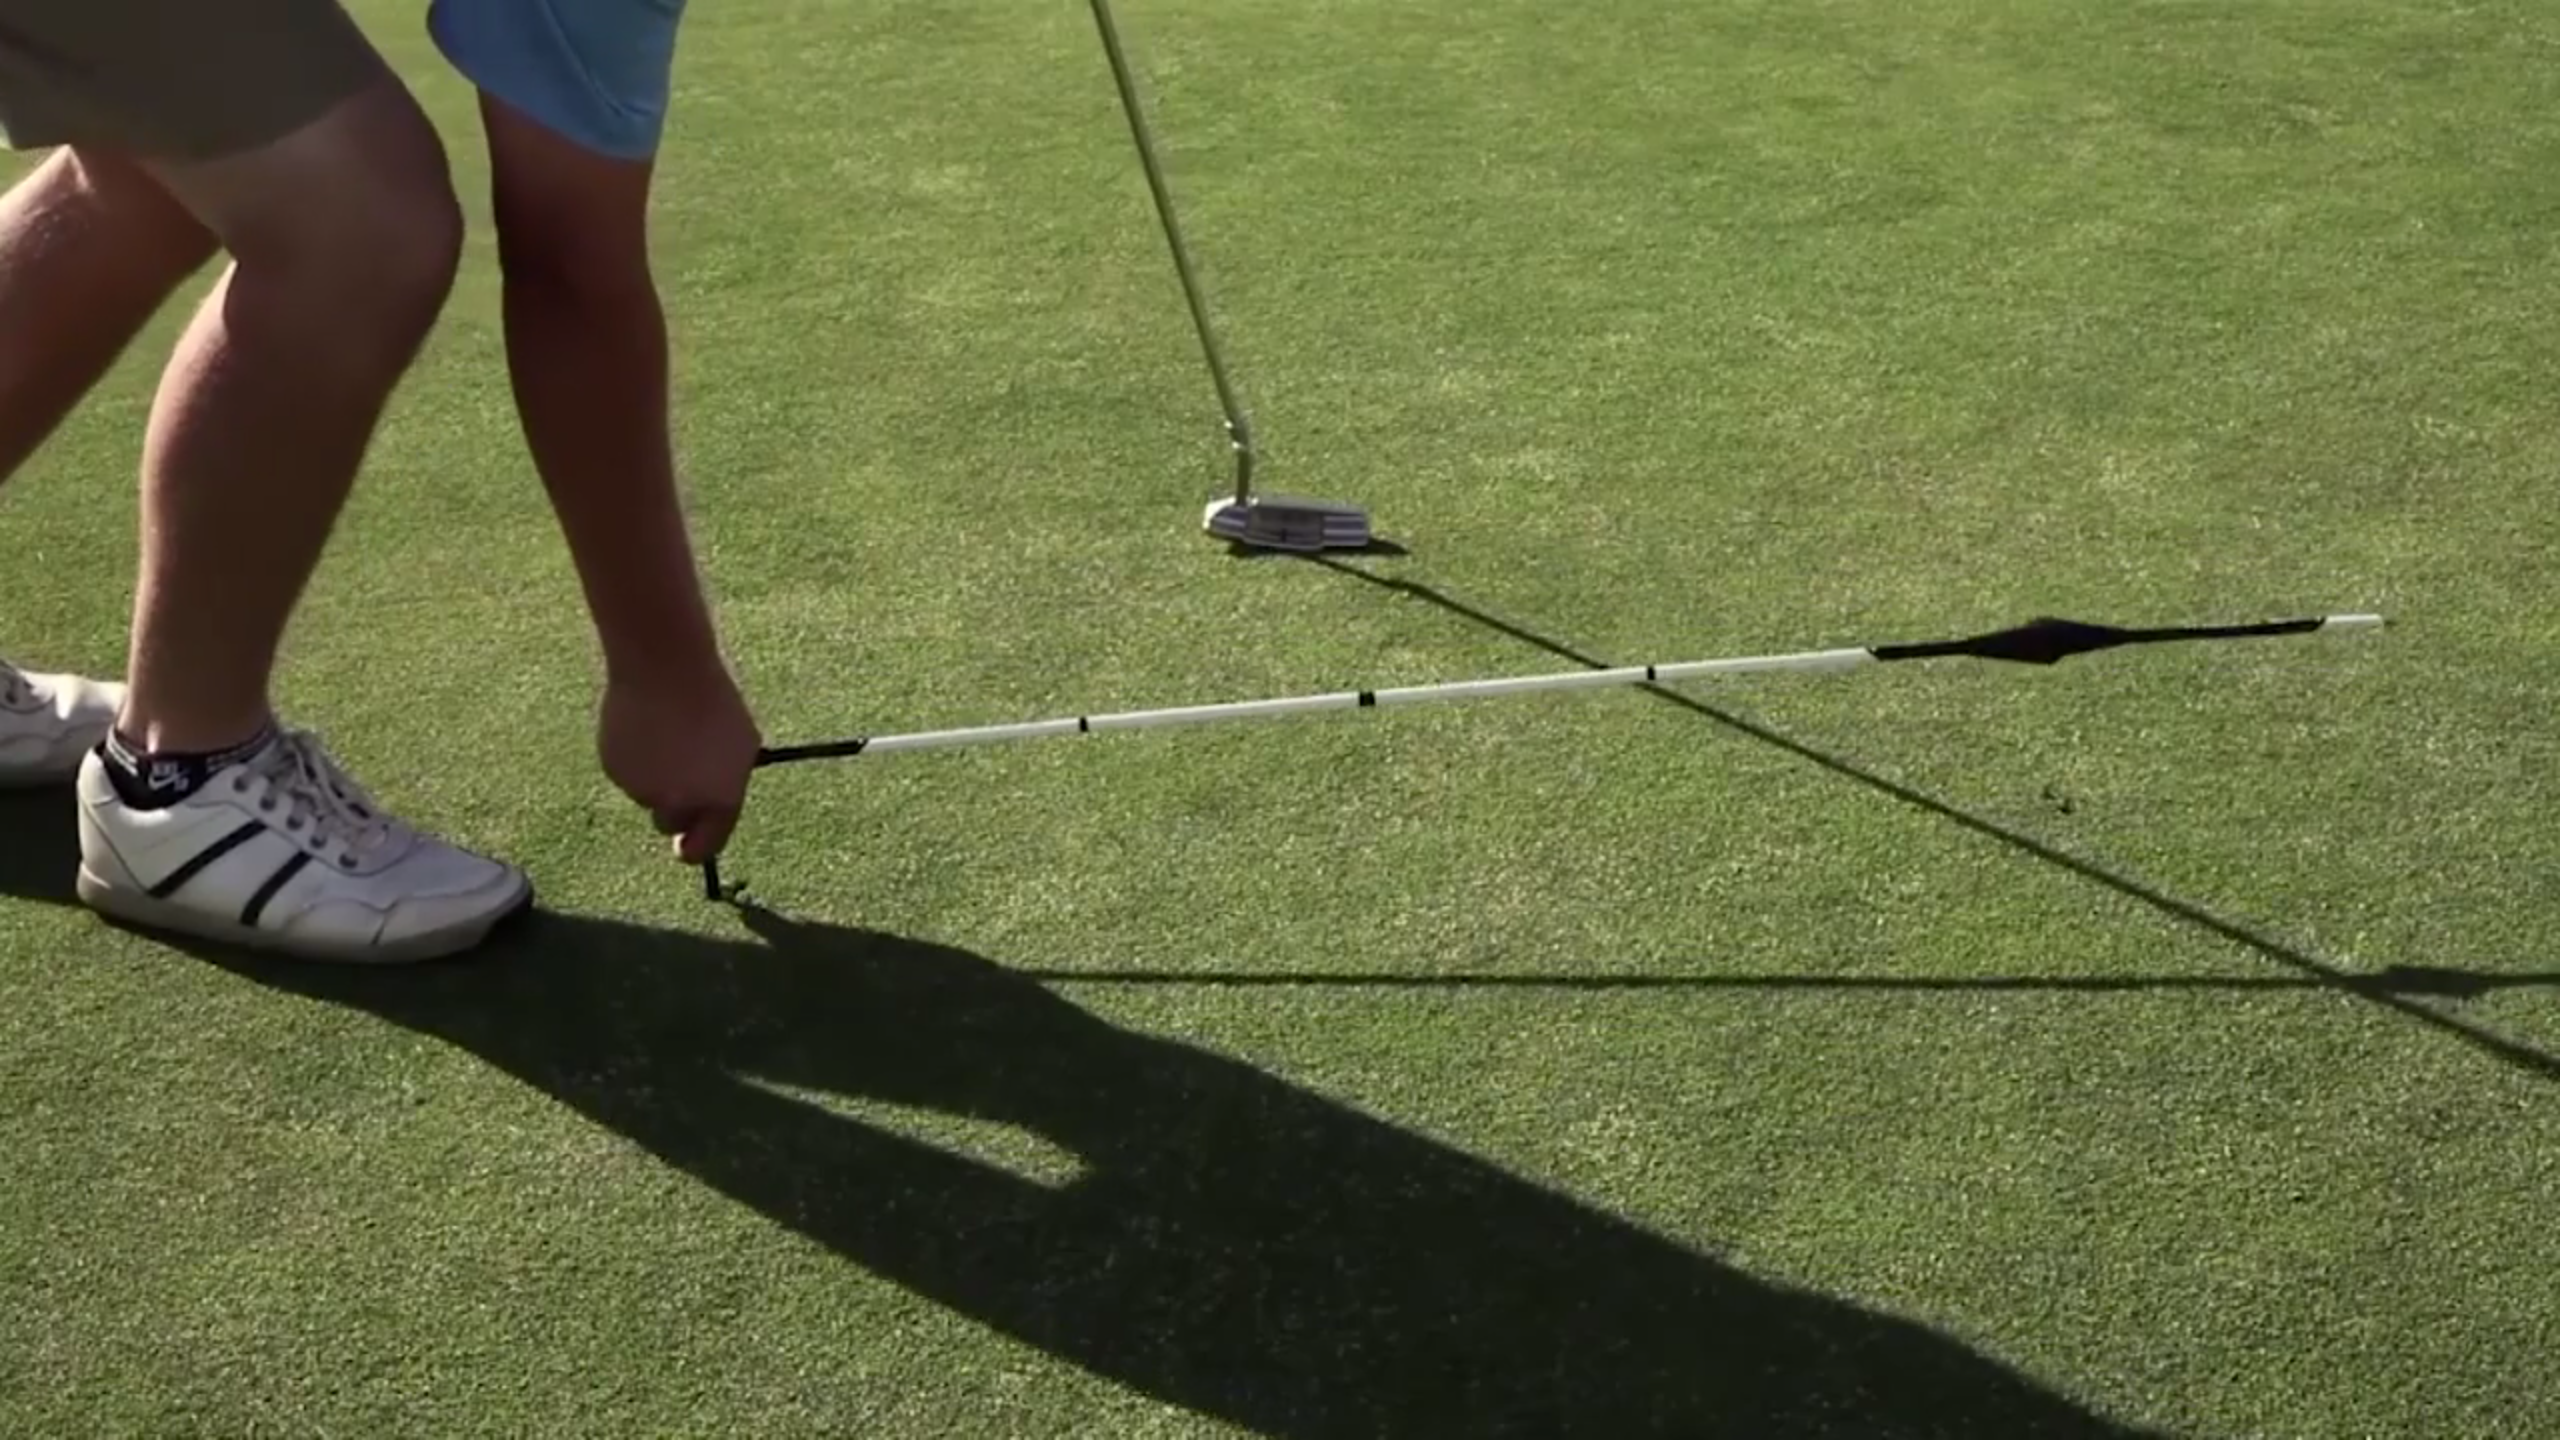 Golf Gadgets: The Alignment Pro